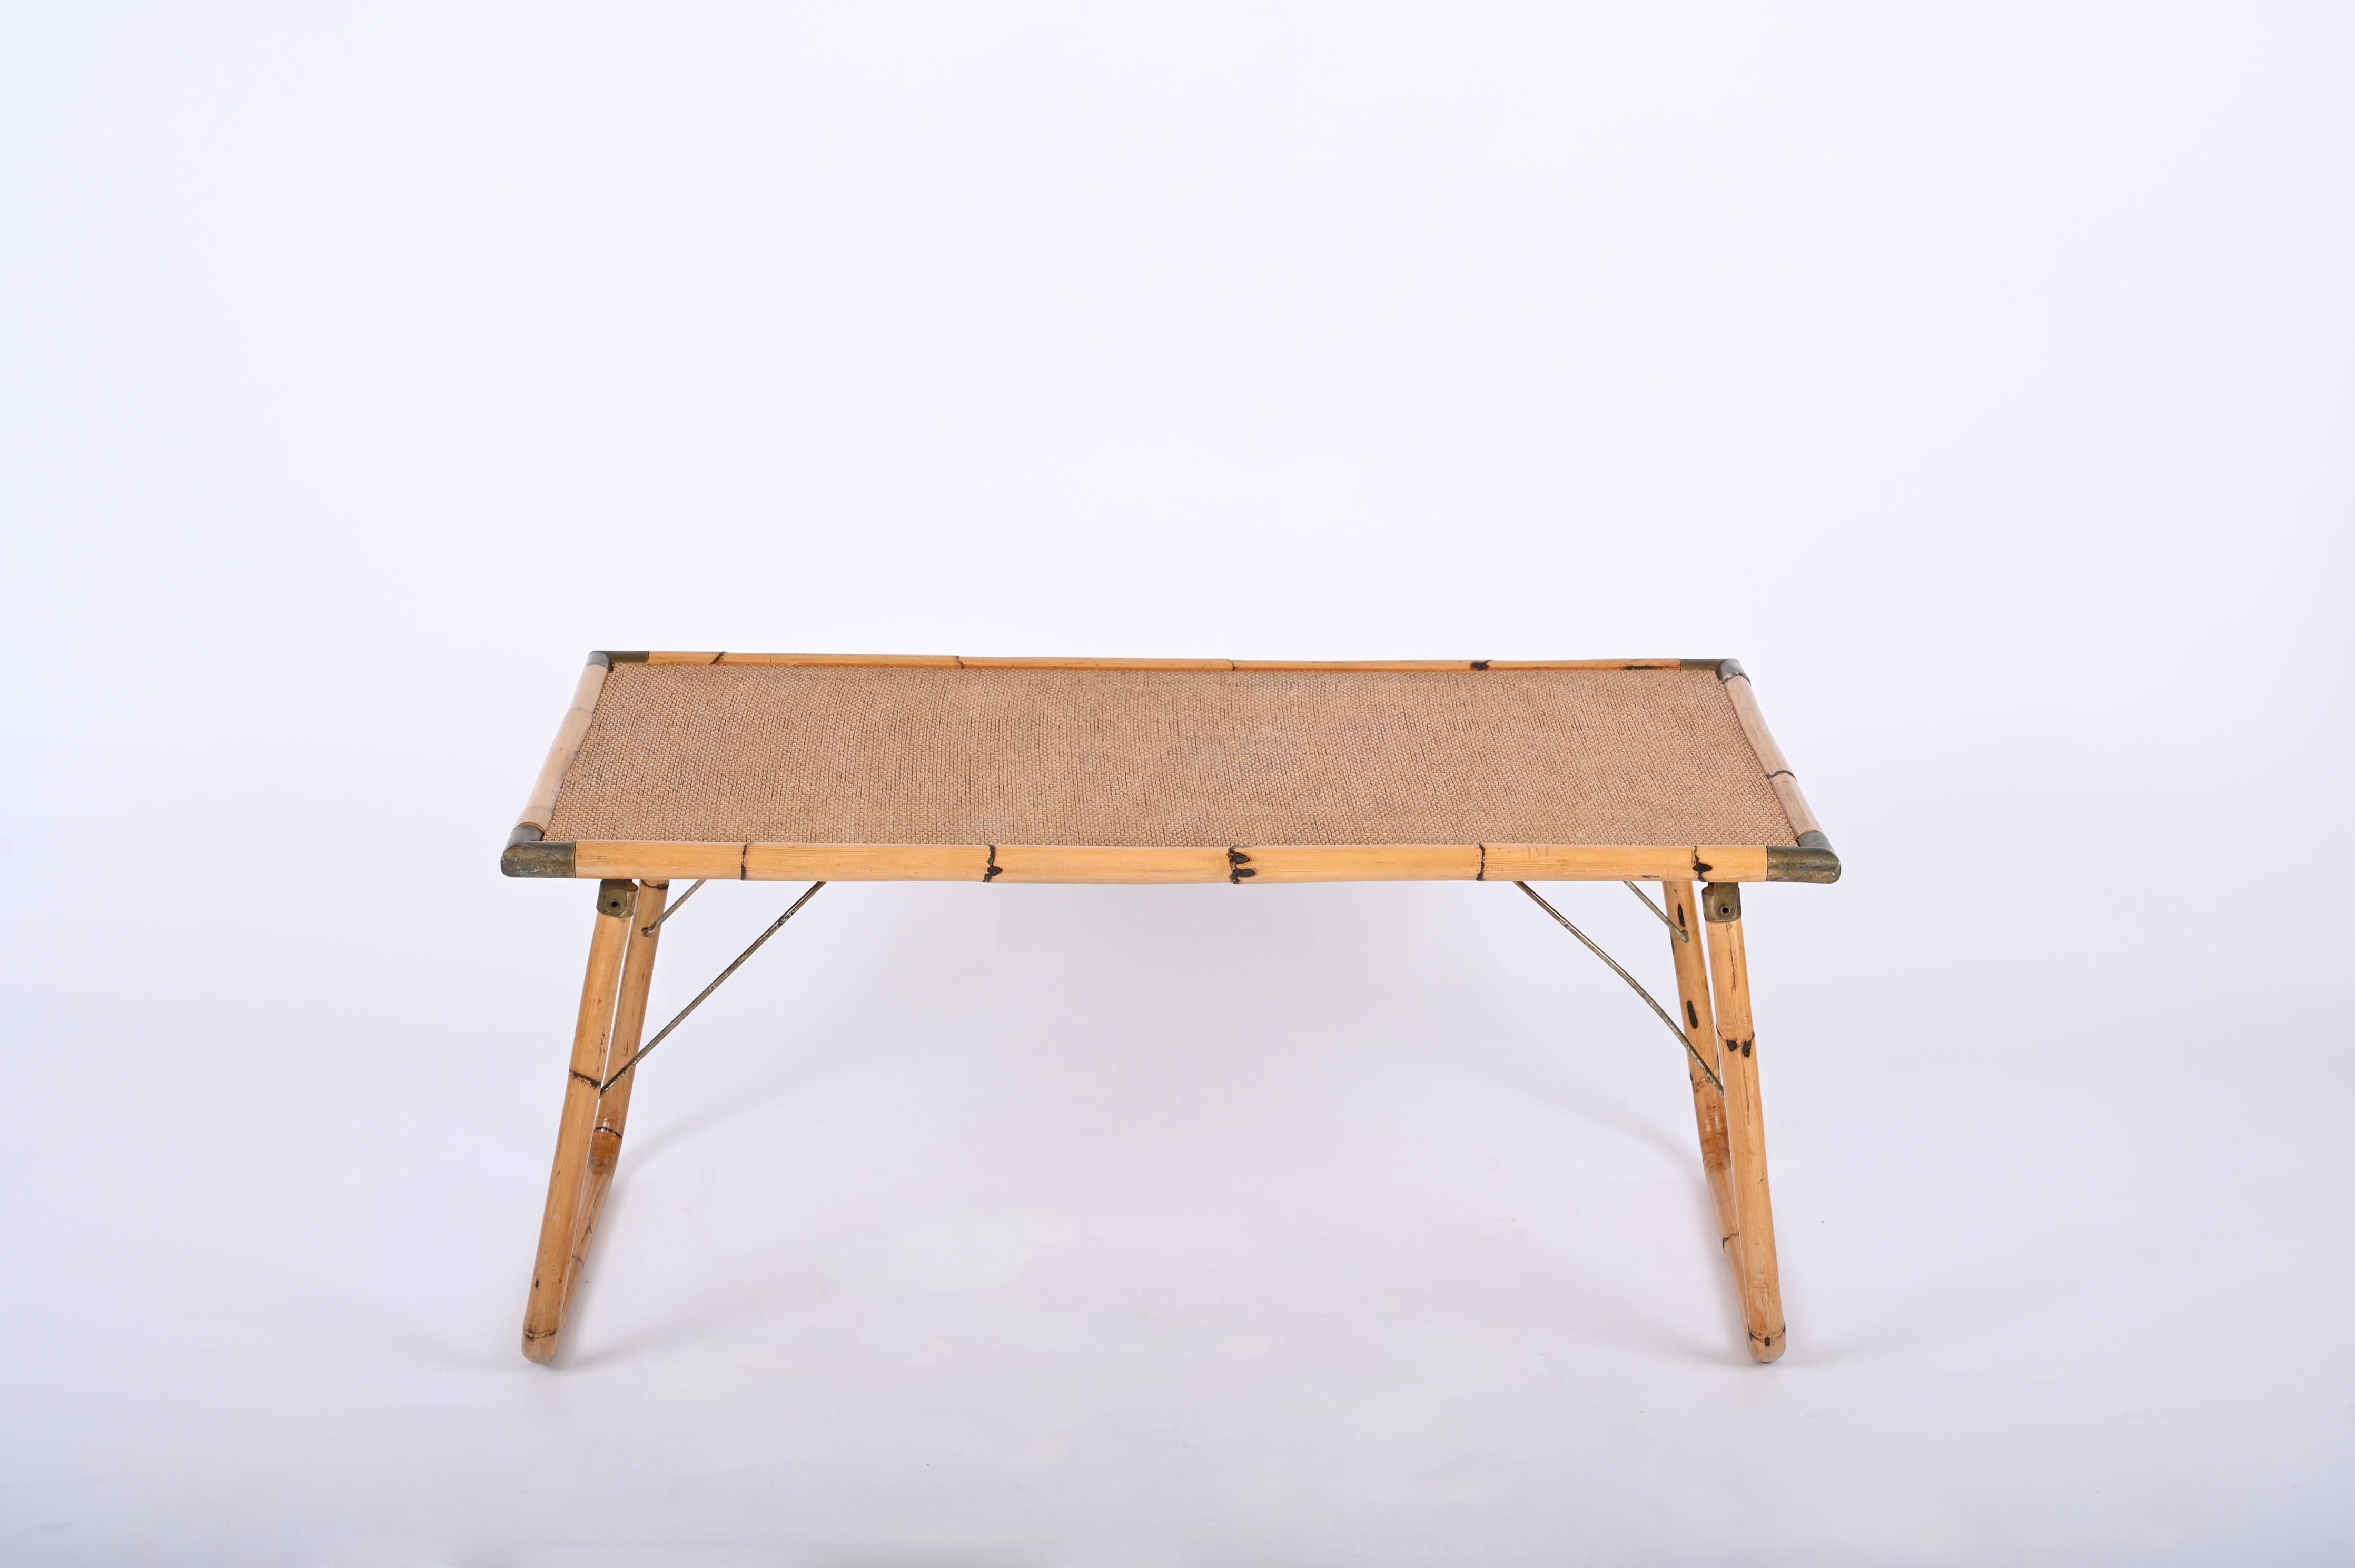 Italian Midcentury Folding Bamboo and Brass Coffee Table, Italy 1960s For Sale